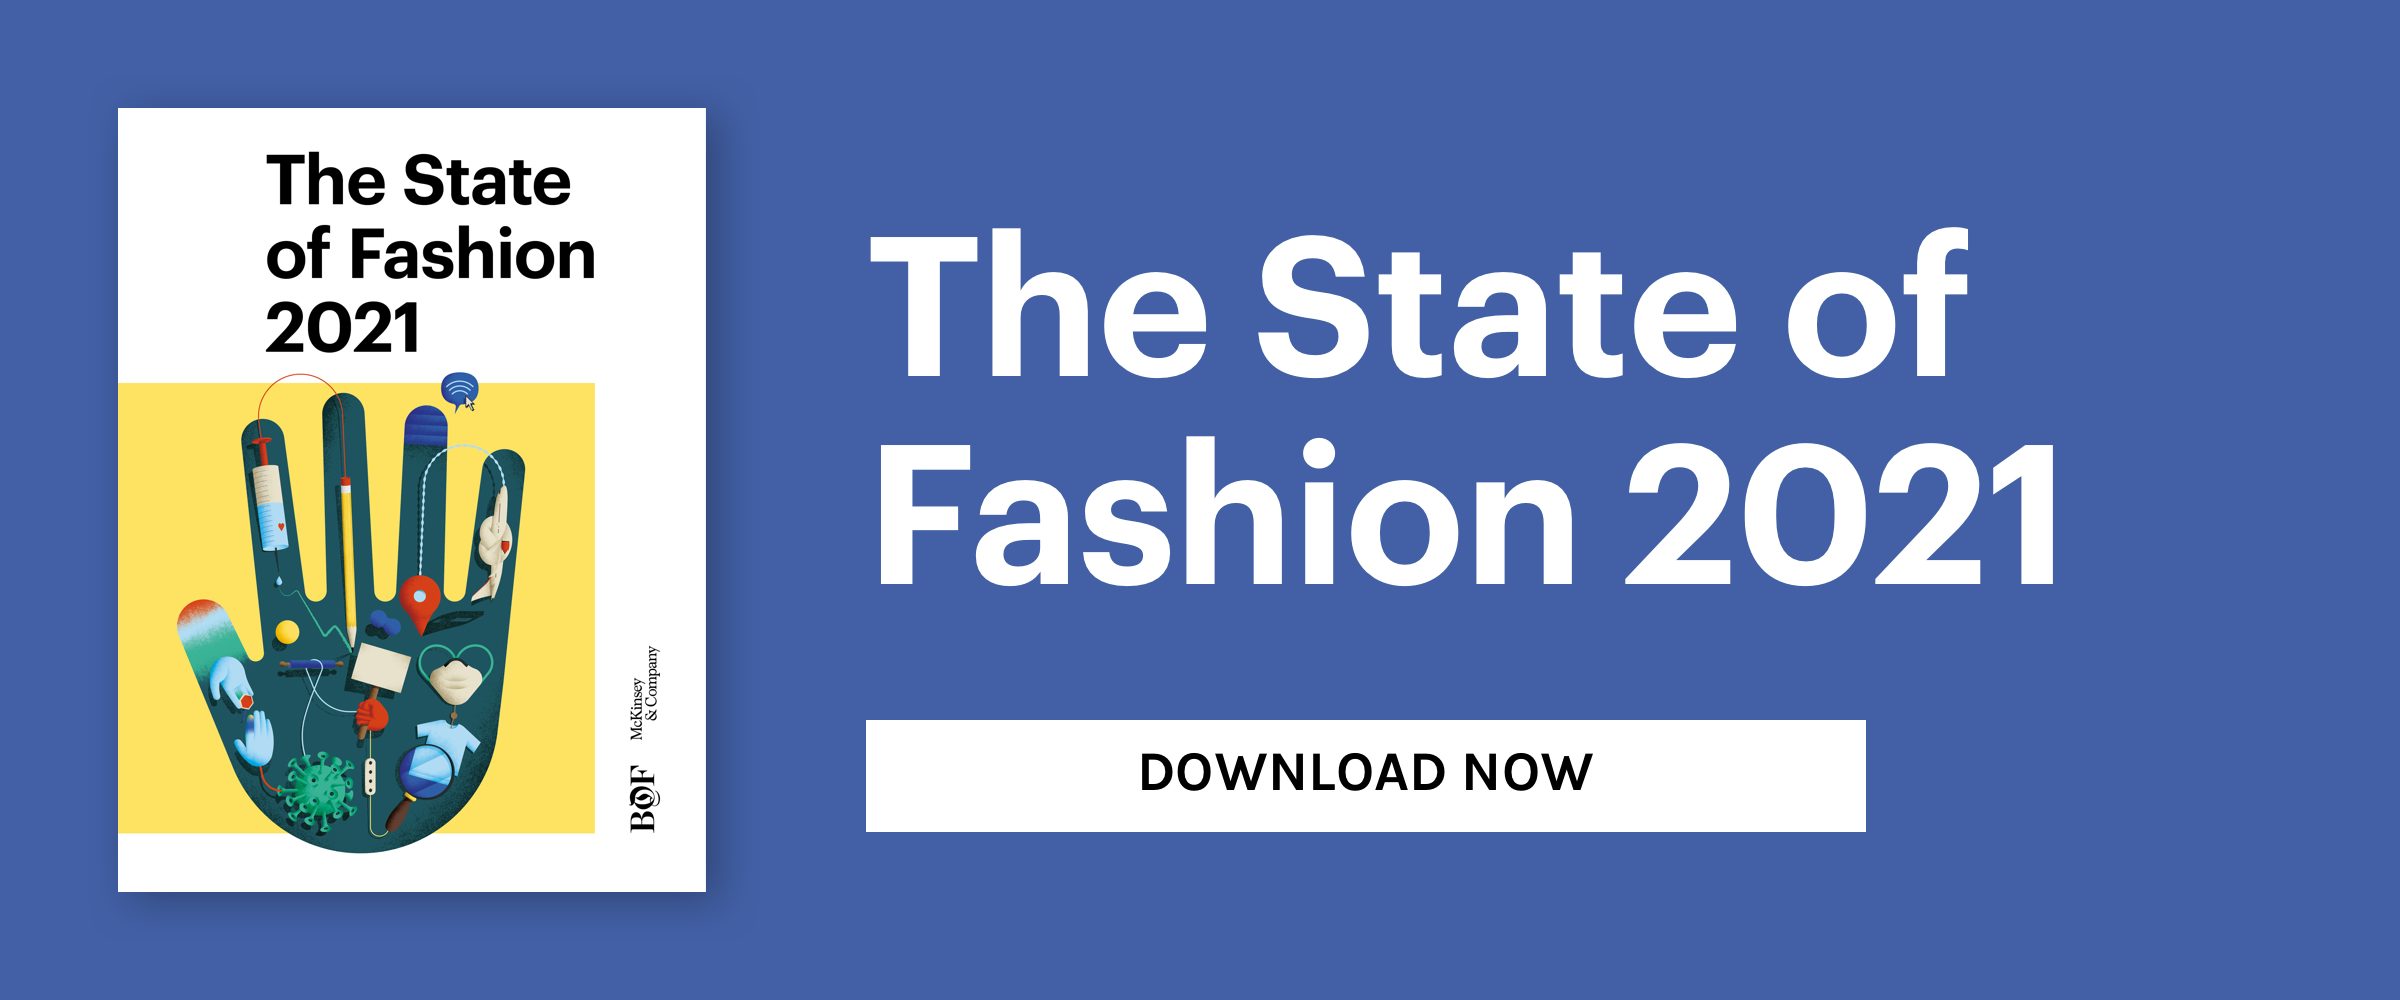 The State of Fashion 2021 Report: Finding Promise in Perilous Times